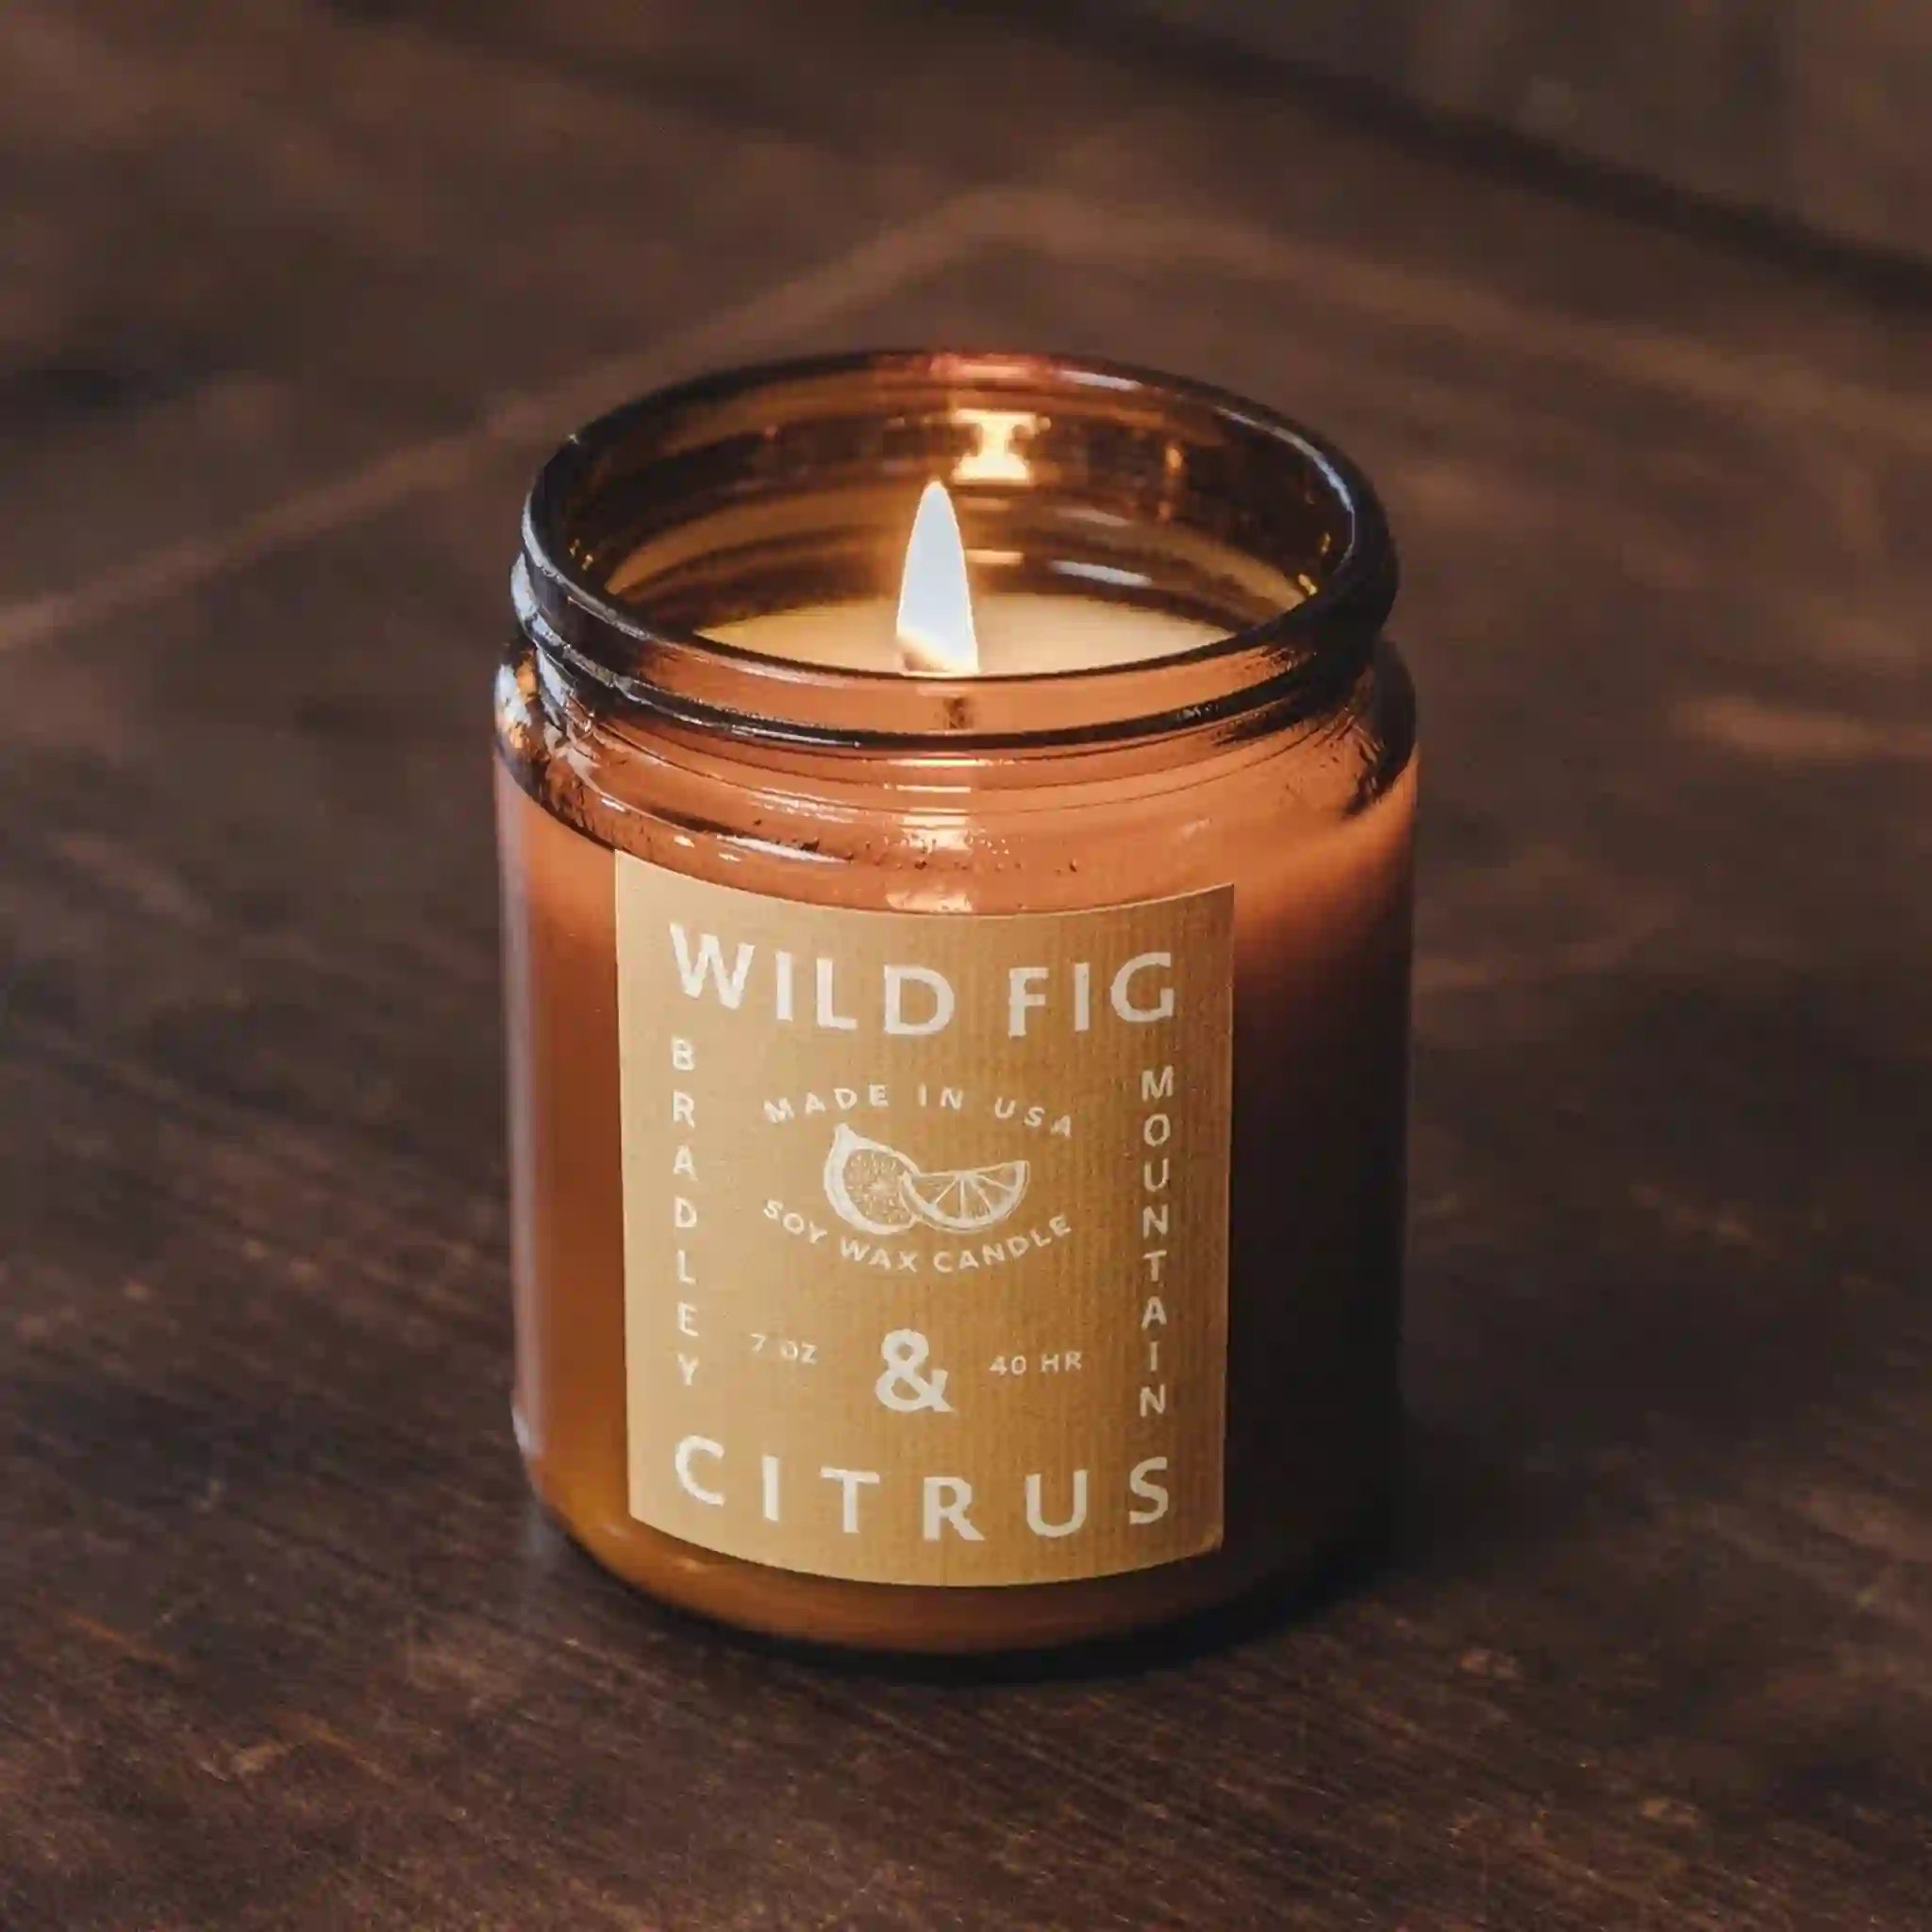 On a brown background is an amber colored jar candle with a yellow label and white text that reads, "Wild Fig & Citrus".